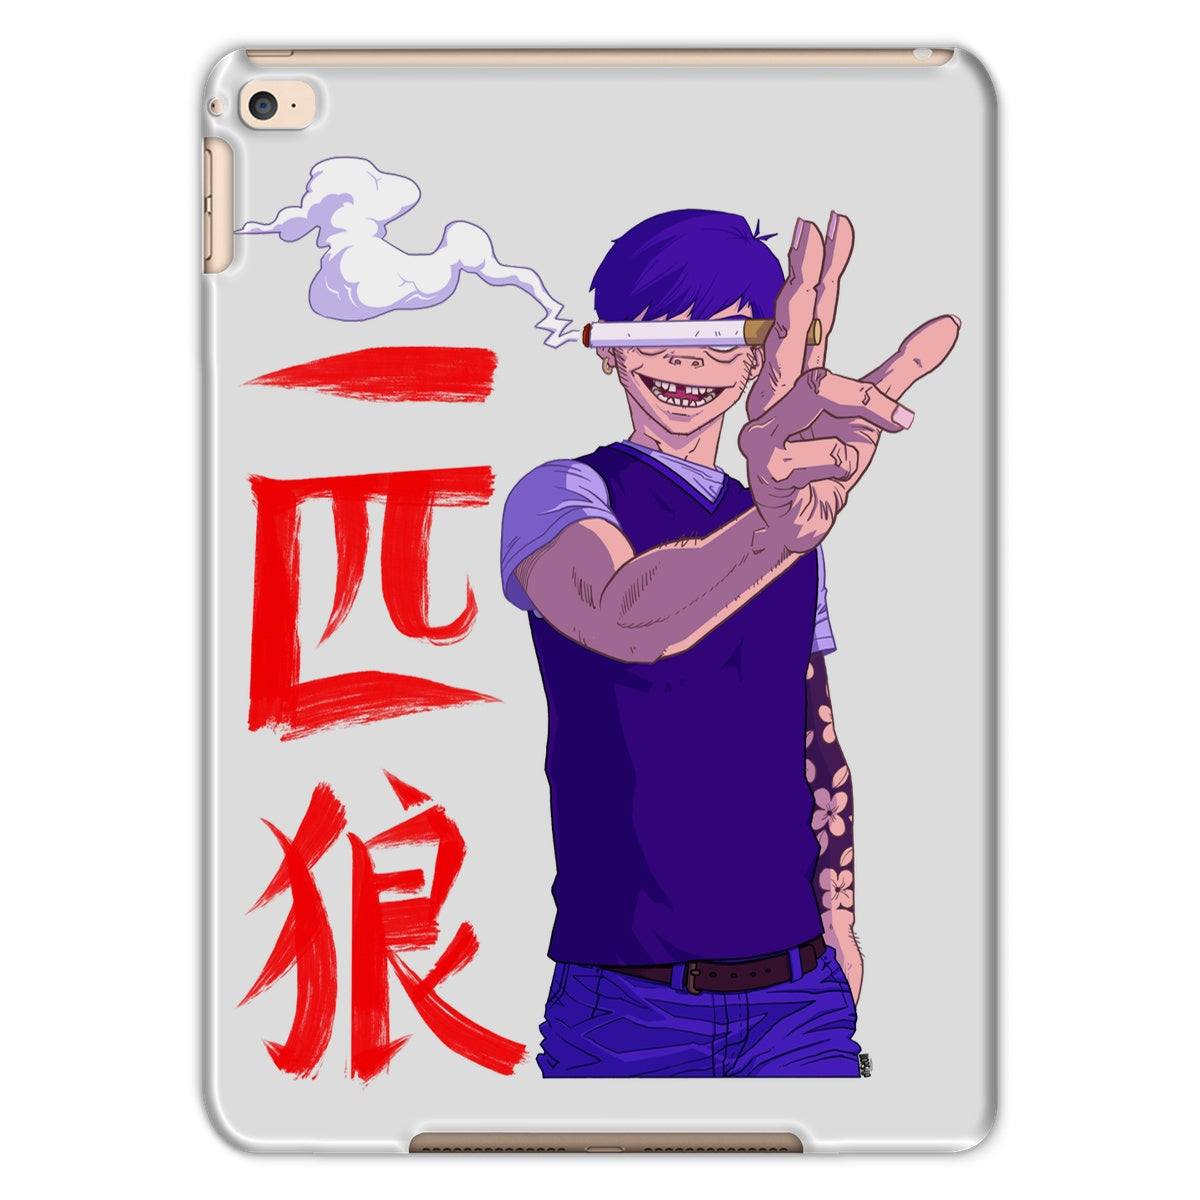 Unique and cool Gorillaz-style Japanese Tablet Case illustration 